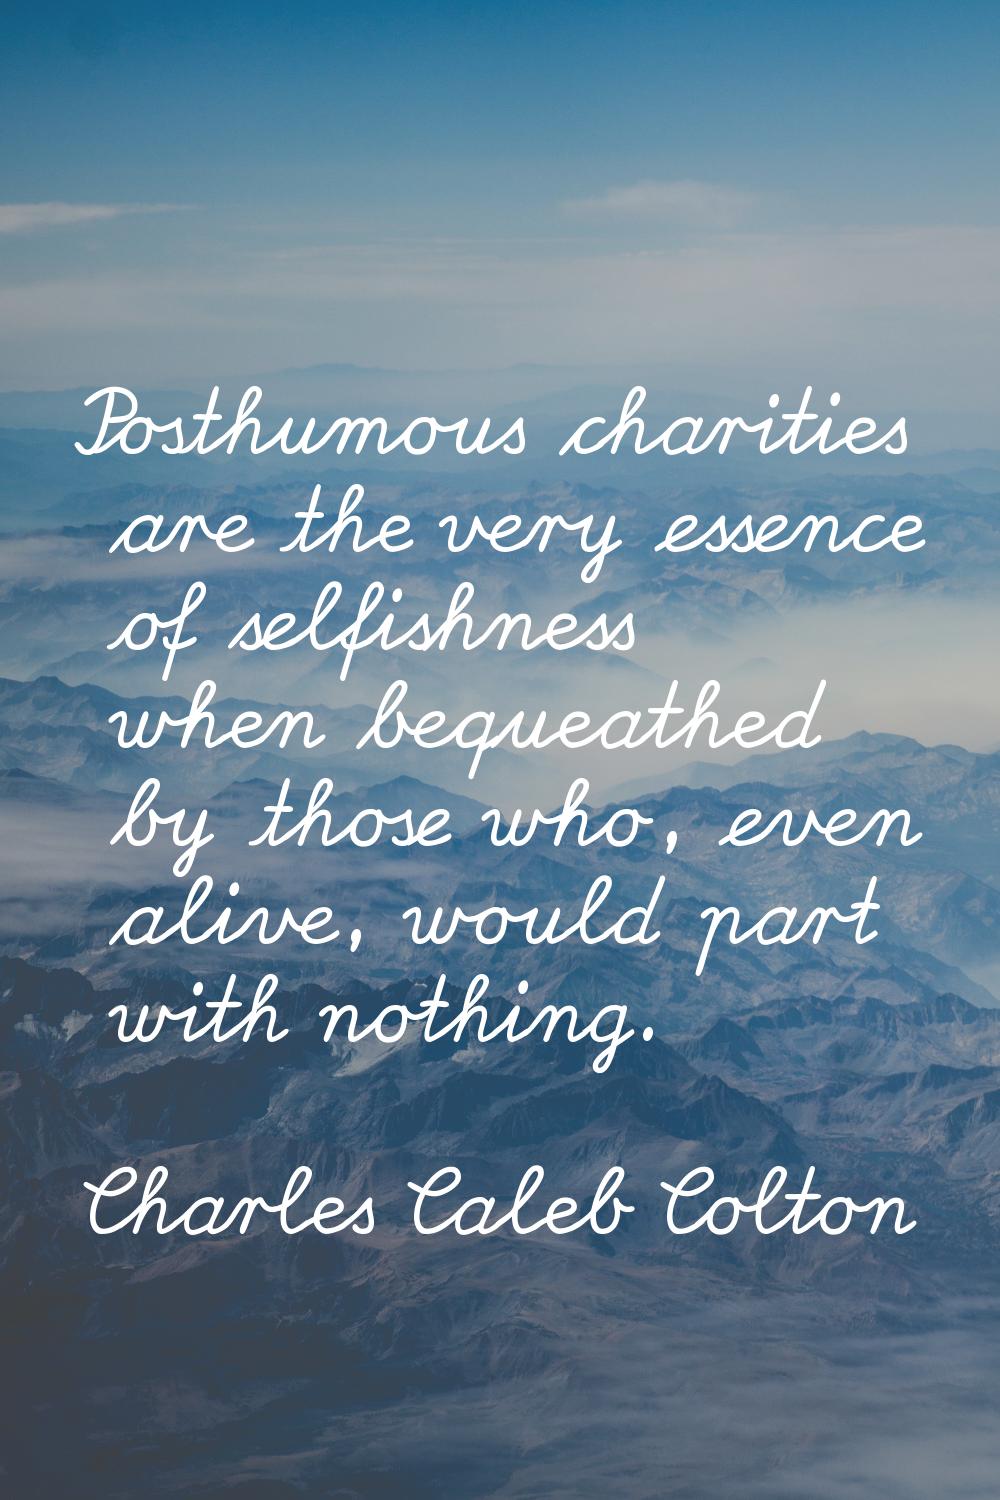 Posthumous charities are the very essence of selfishness when bequeathed by those who, even alive, 